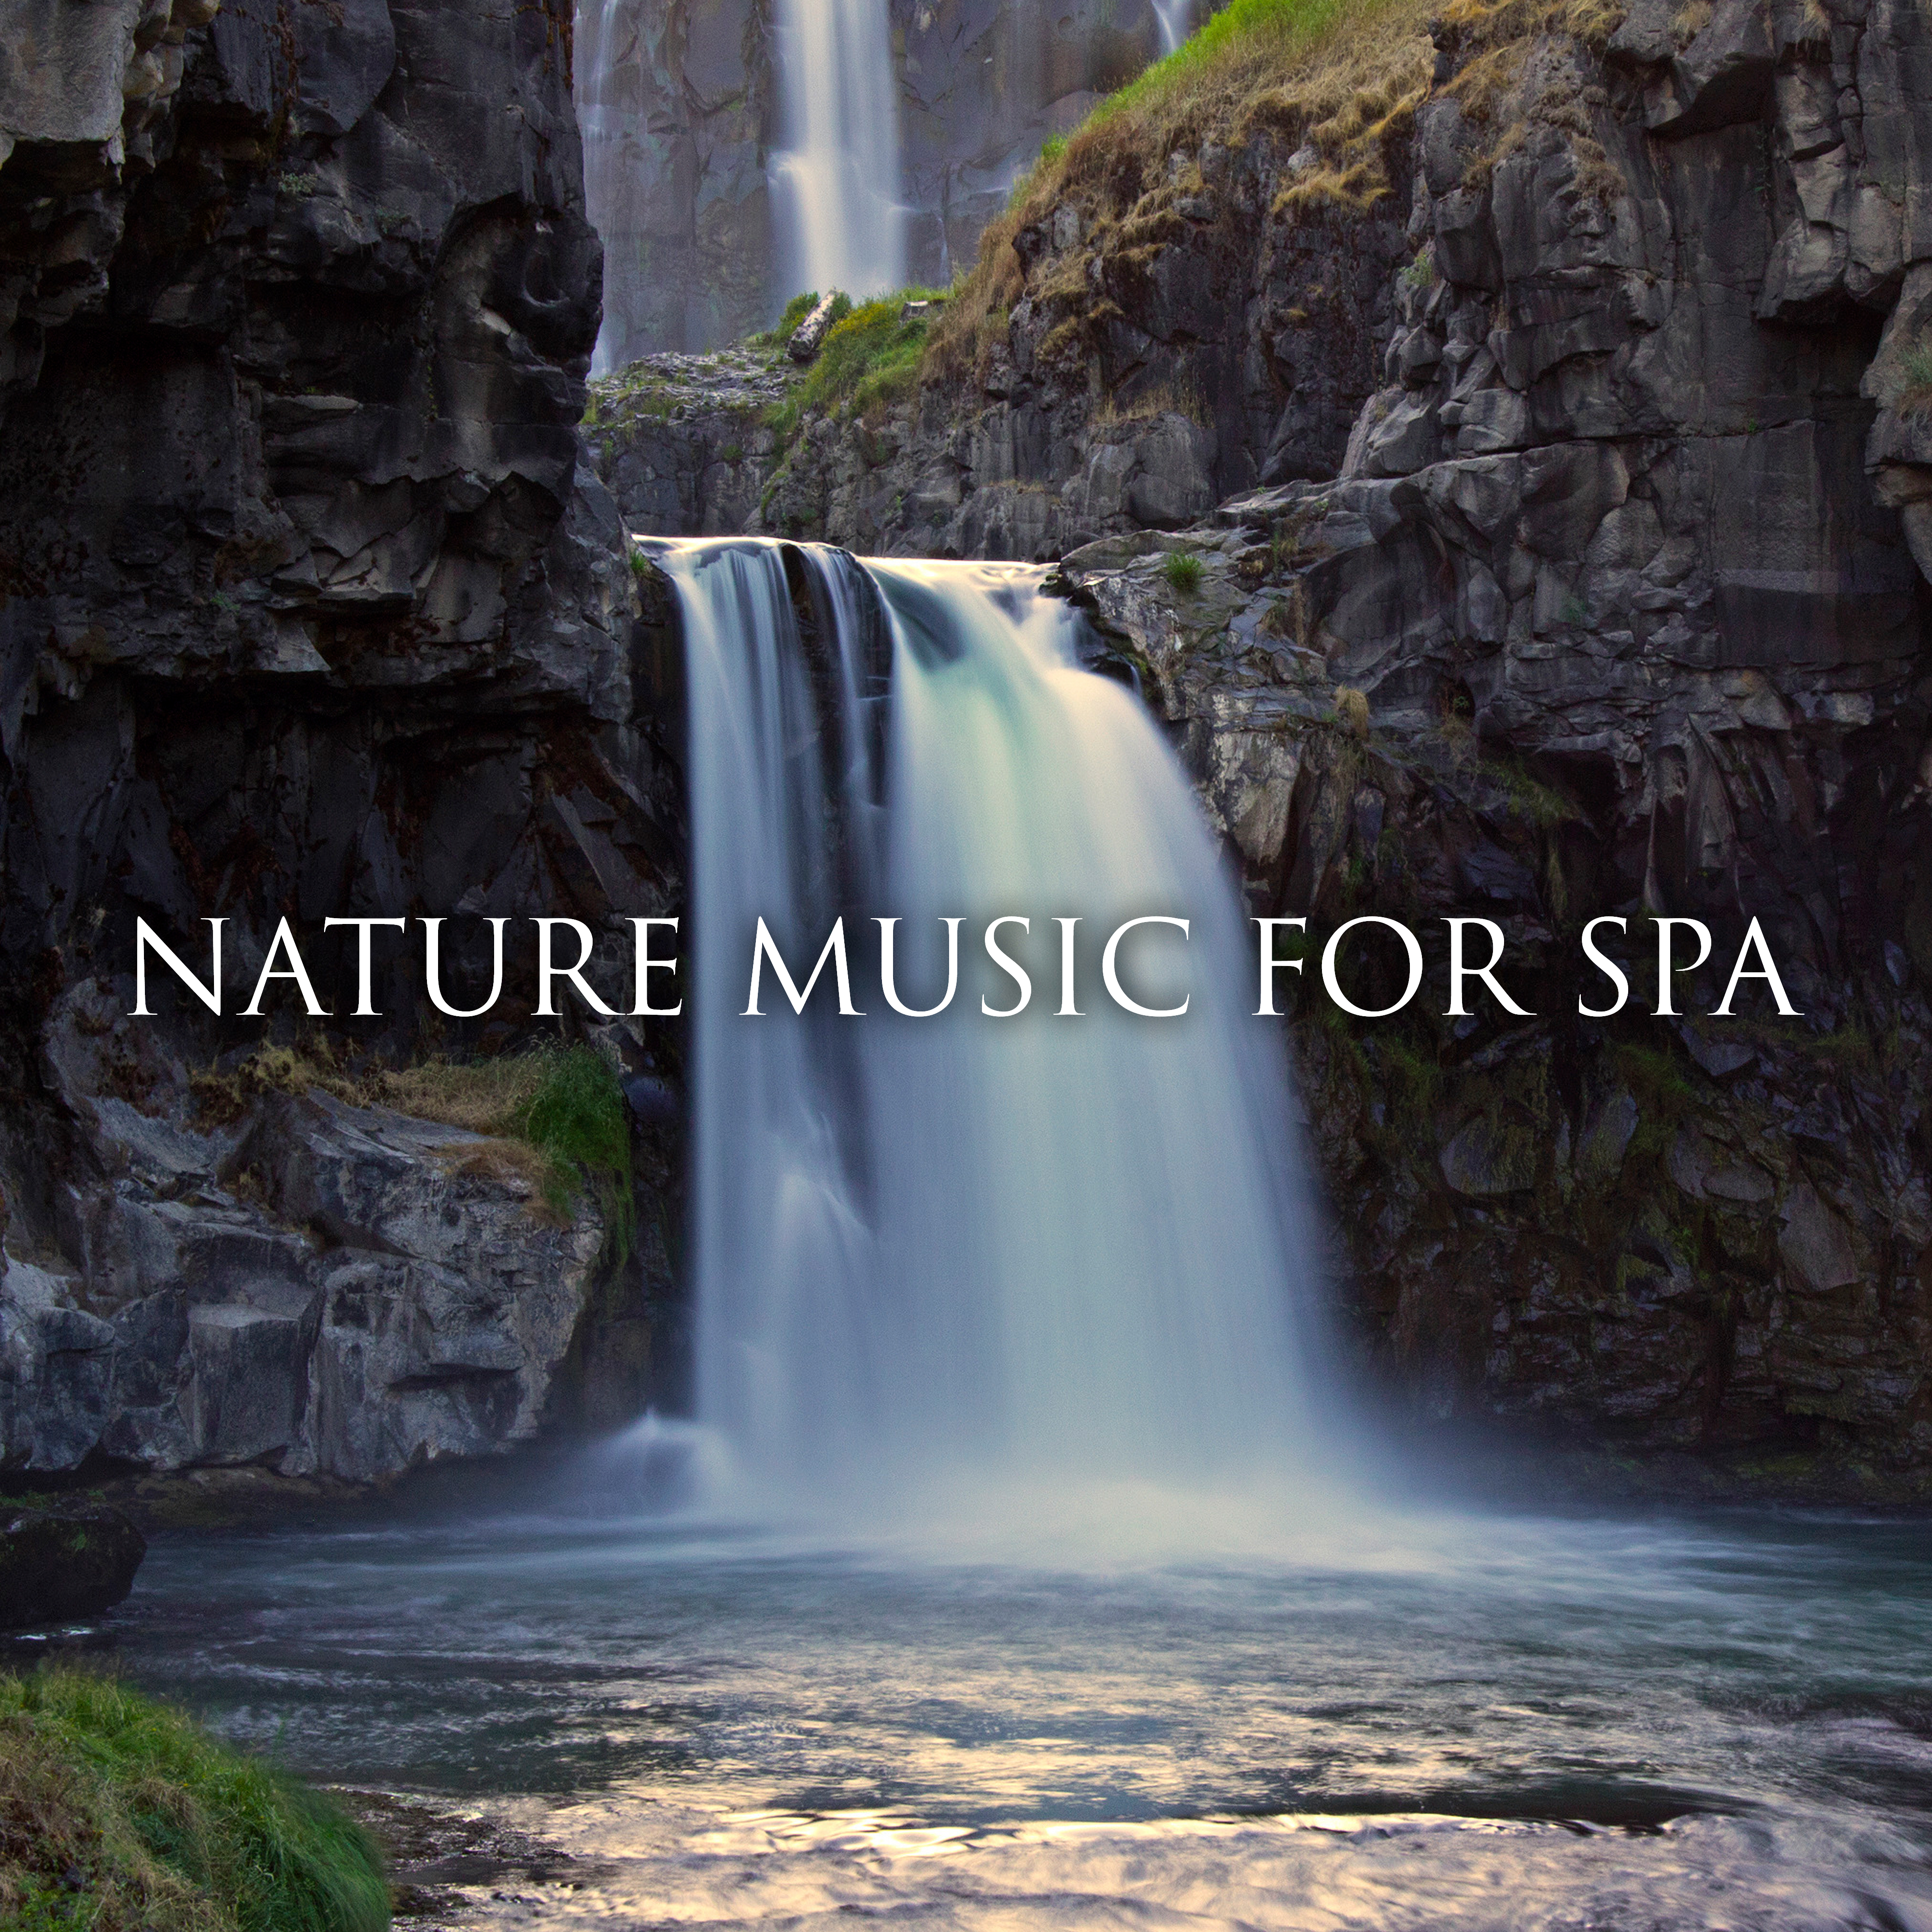 Nature Music for Spa – Relaxing Music Therapy, Nature Sounds, Healing Bliss, Spa Relaxation